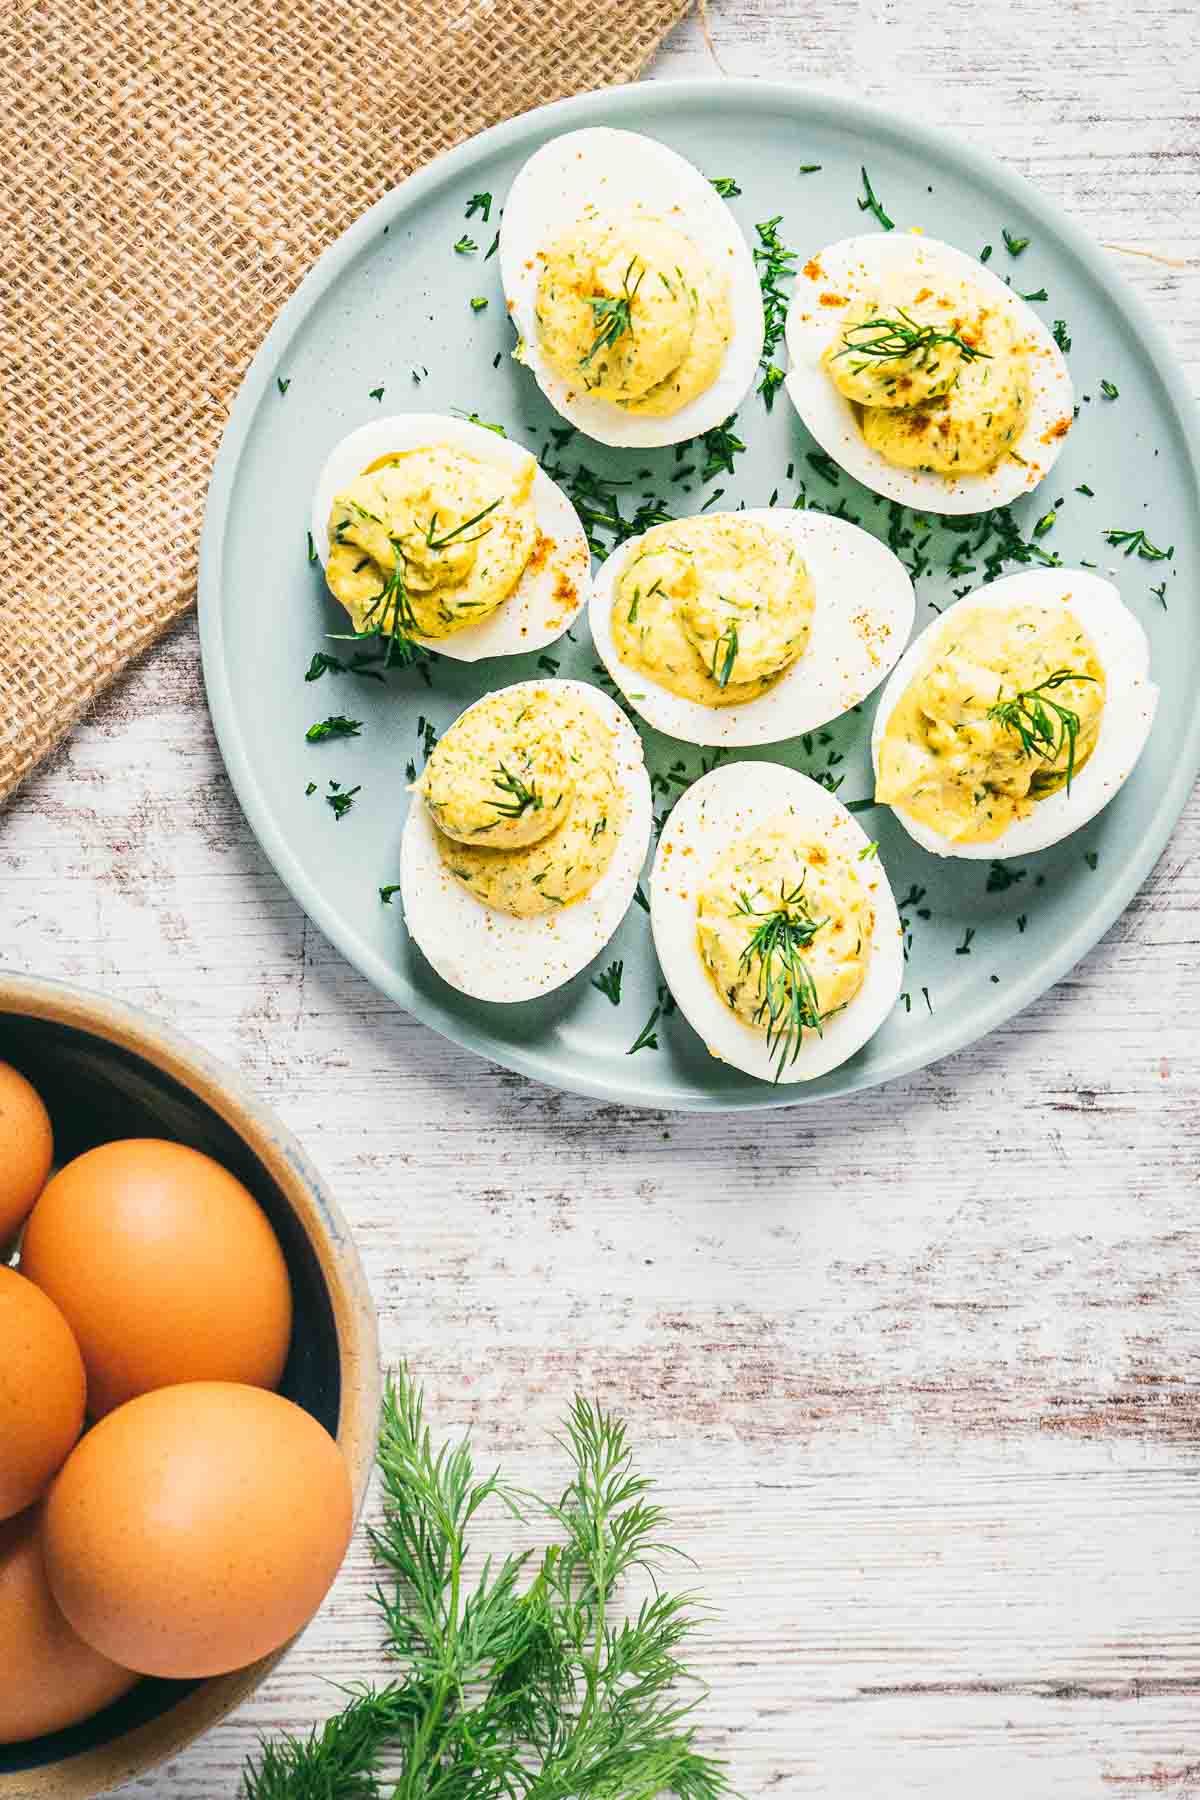 Deviled eggs on snack plate.